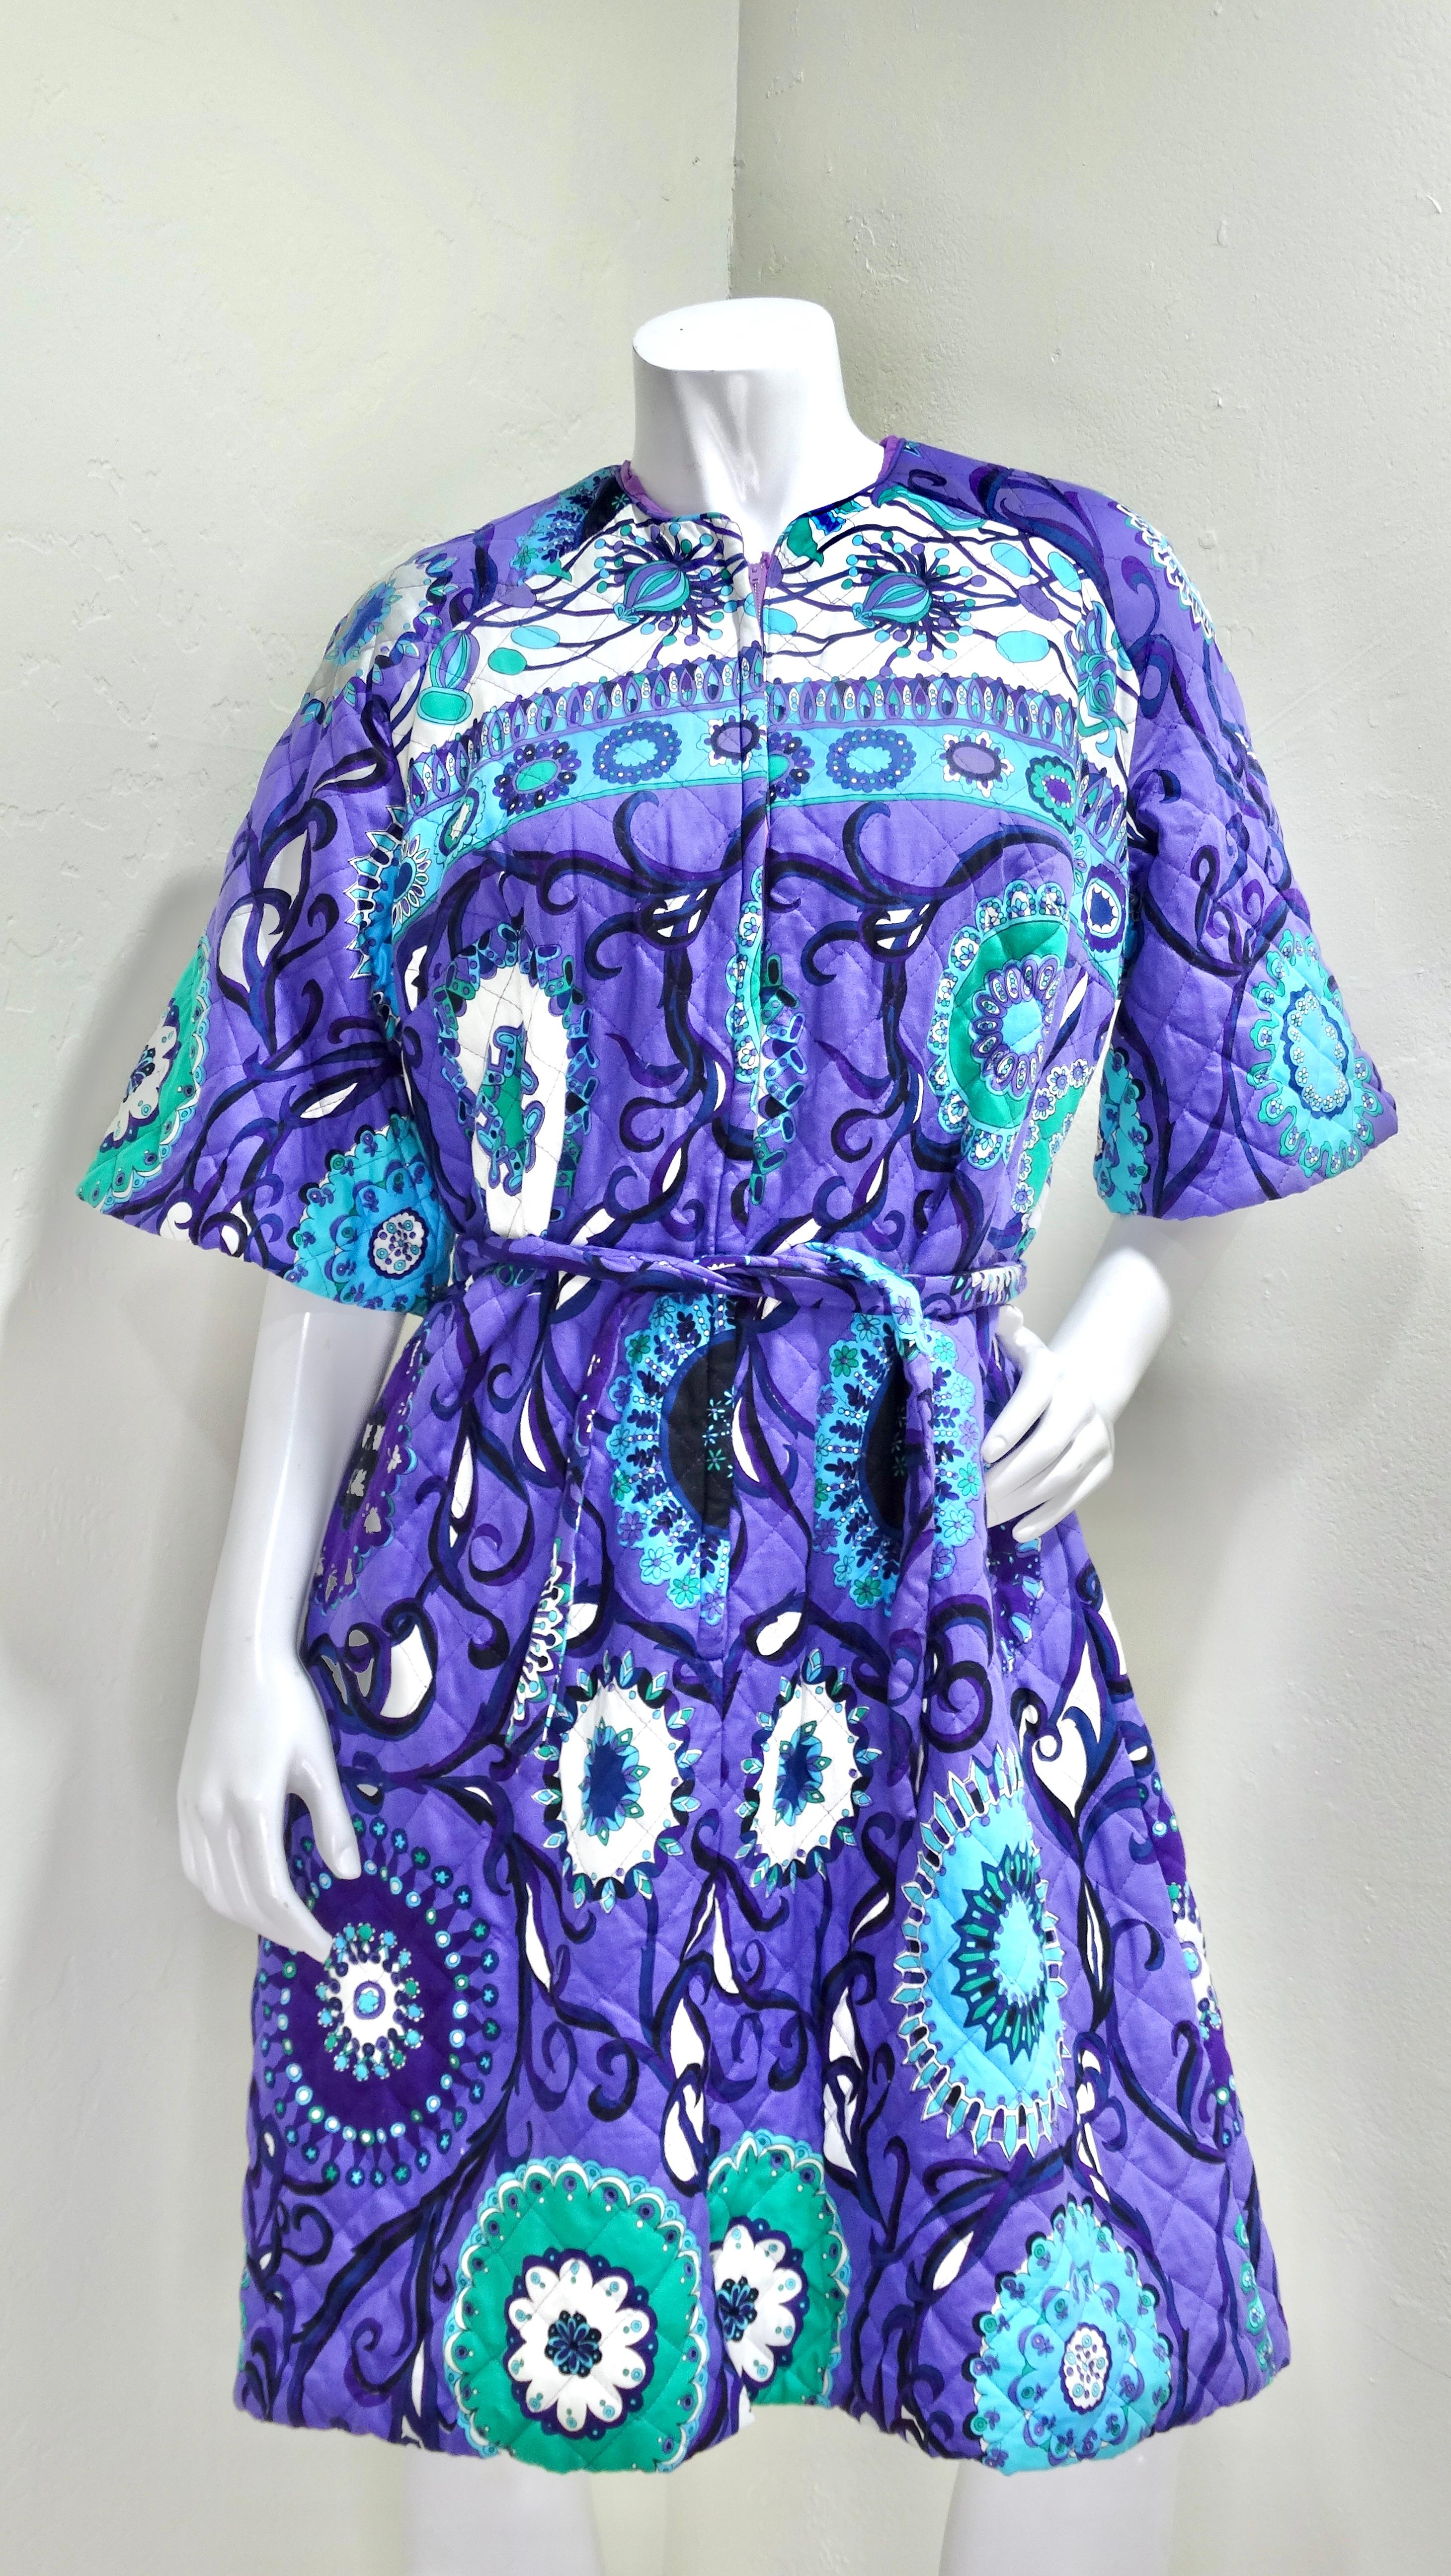 Don't miss out on the chance to snag a rare piece of 1960's Pucci that features a fully cotton diamond-quilted fabric. Details include a zipper on the front, a tie waist, bell sleeves, and hues of green, blue, and purple. Pair this dress this some